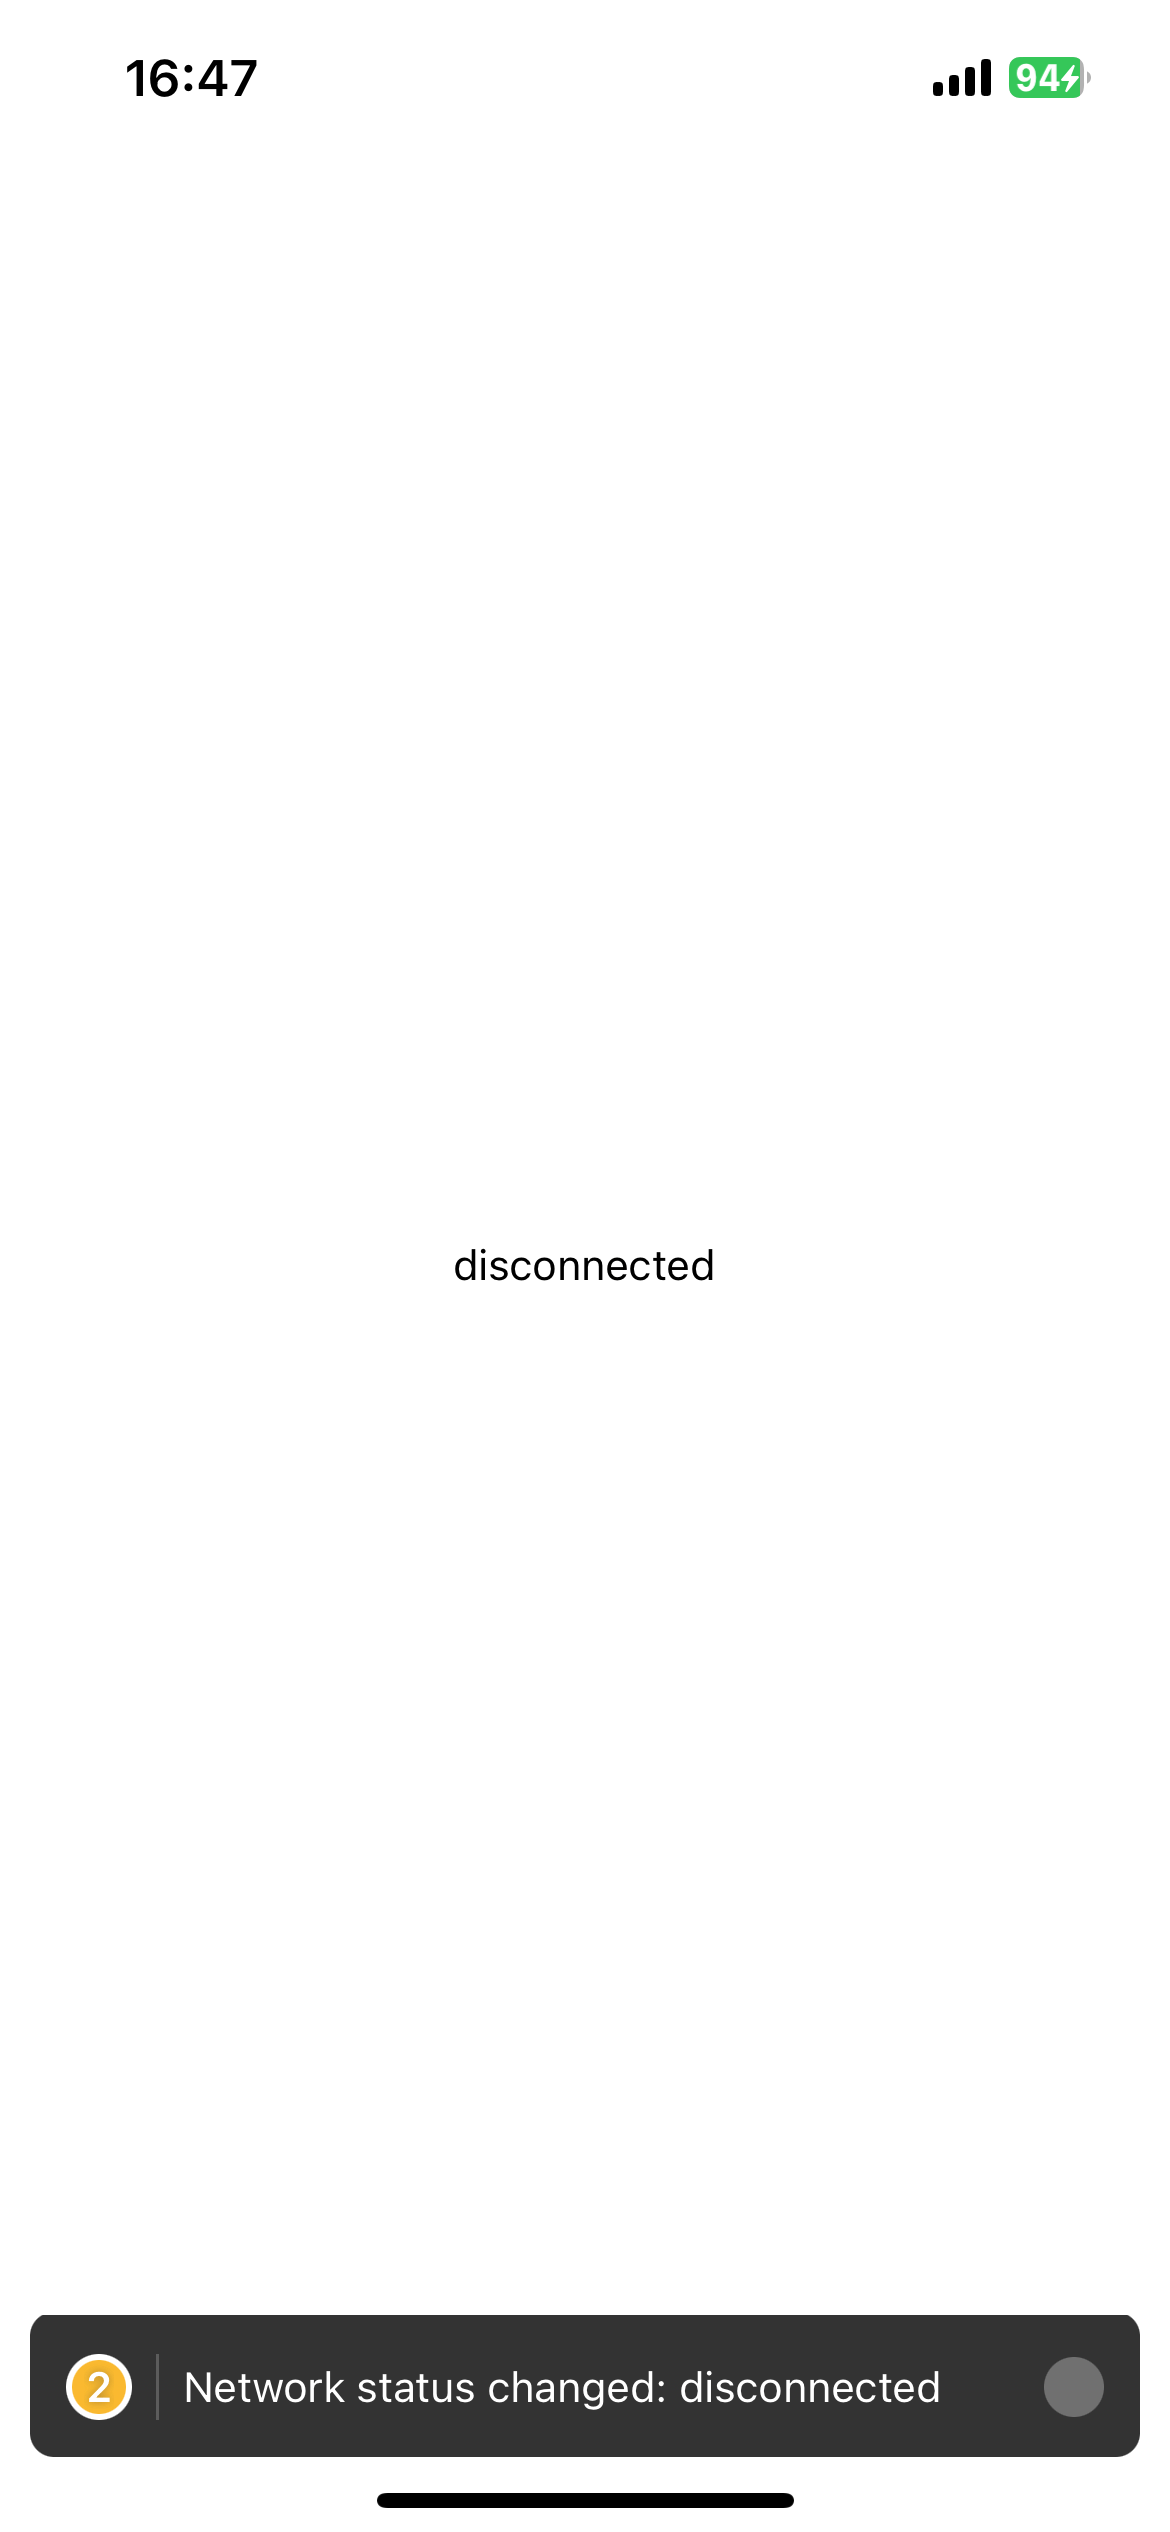 Disconnected